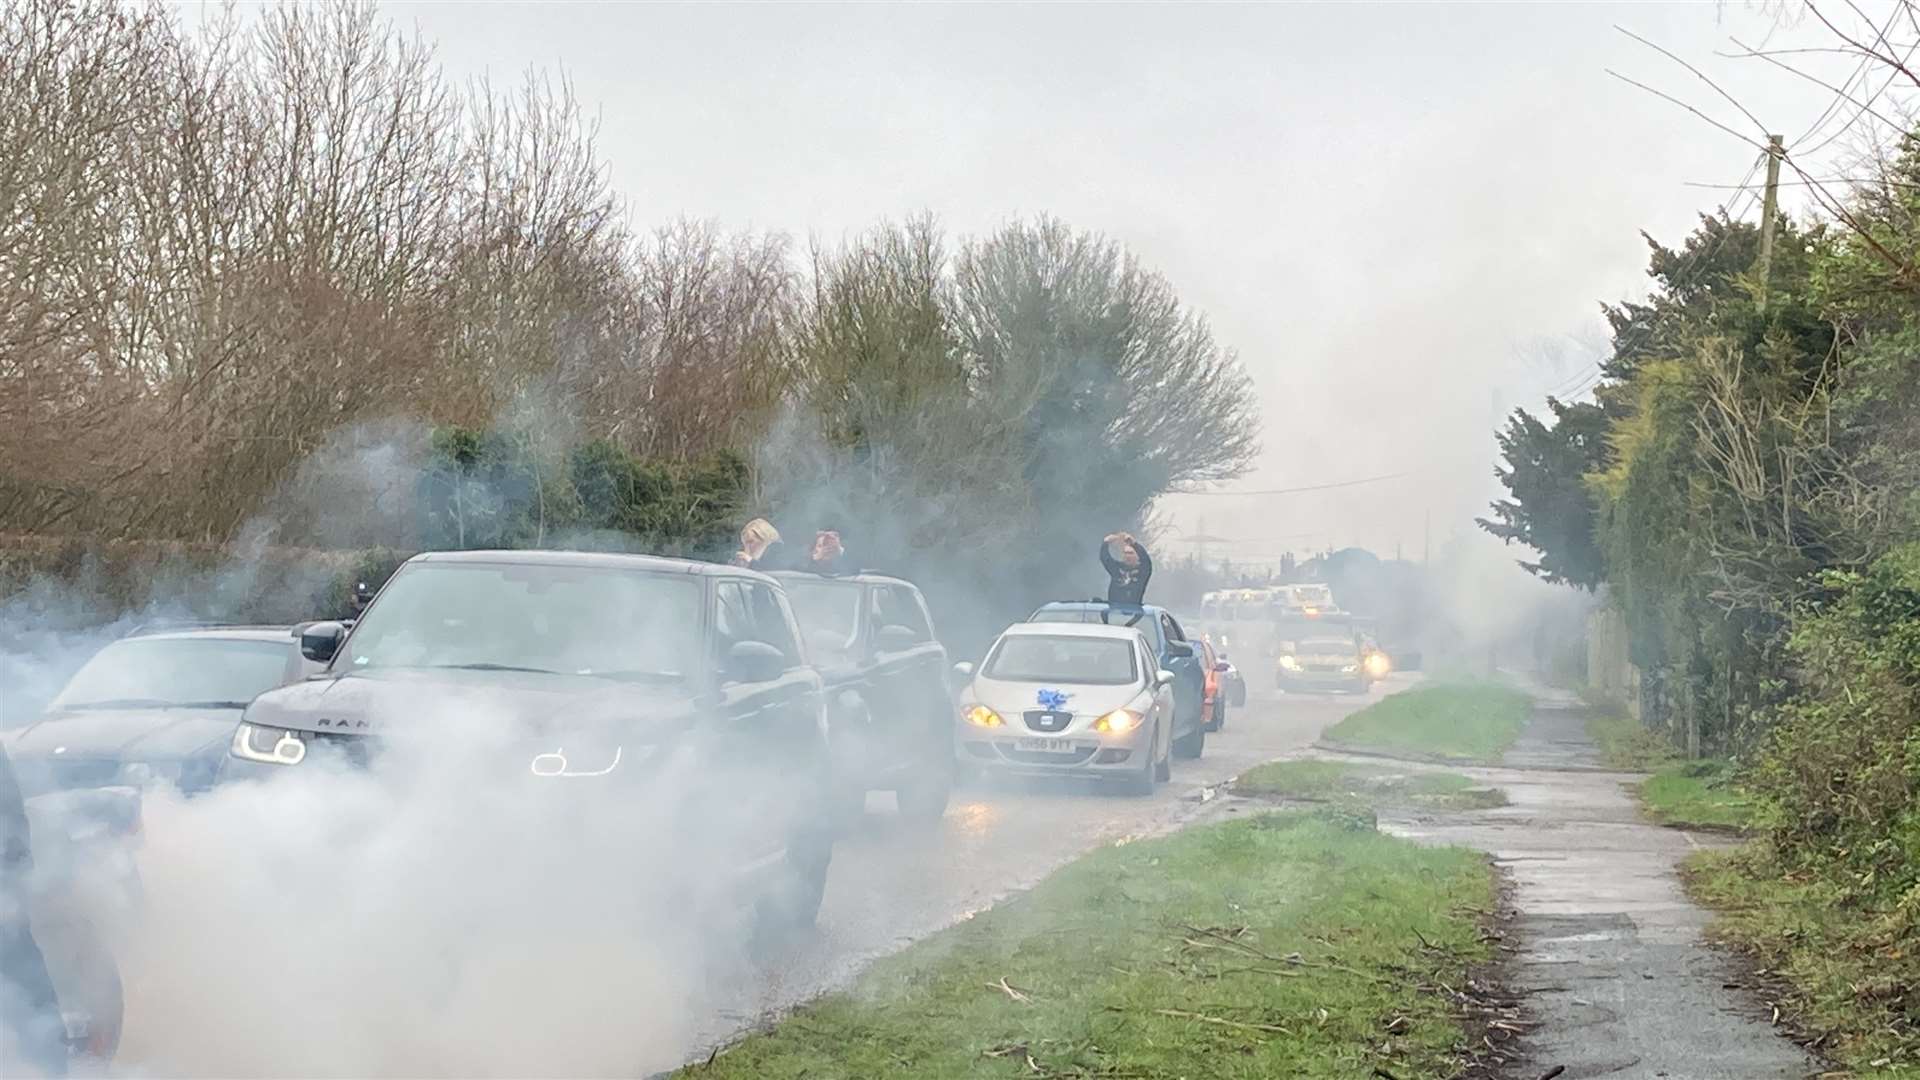 Smoke from burning tyres covered the carriageway outside the Garden of England crematorium at Bobbing for the funeral of car-mad Frankie Wright